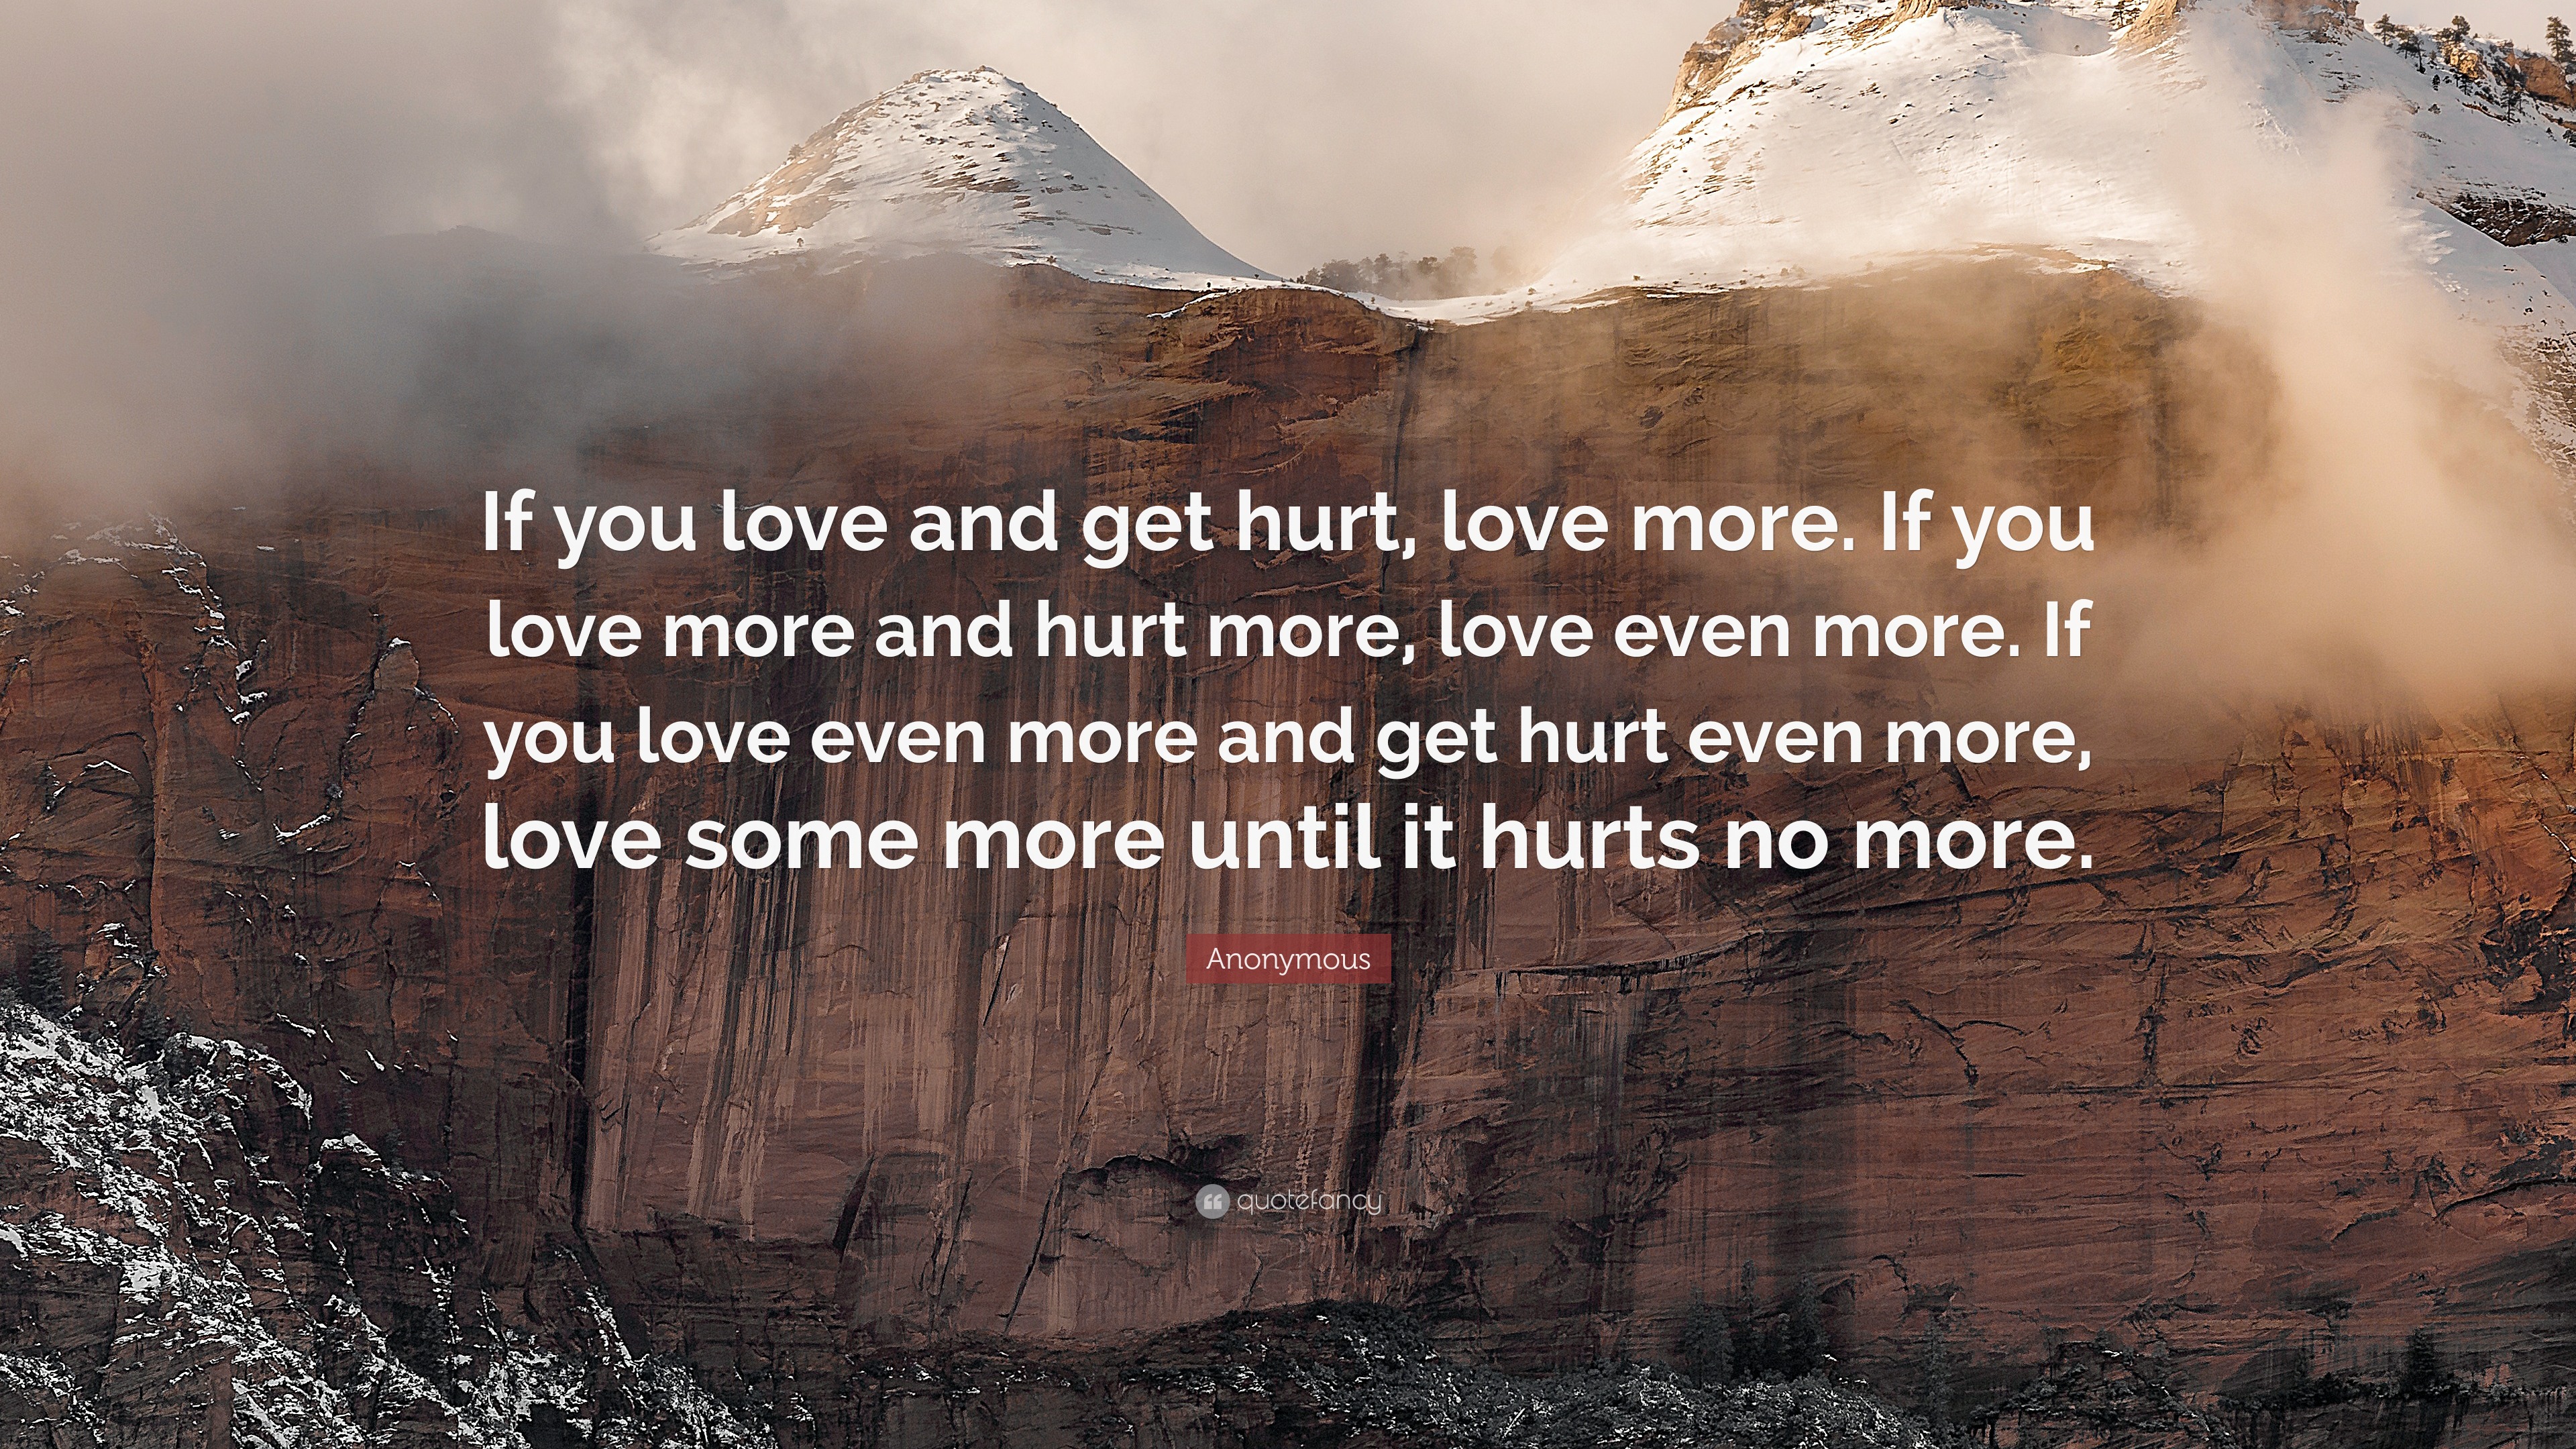 William Shakespeare Quote: “If you love and get hurt, love more. If you